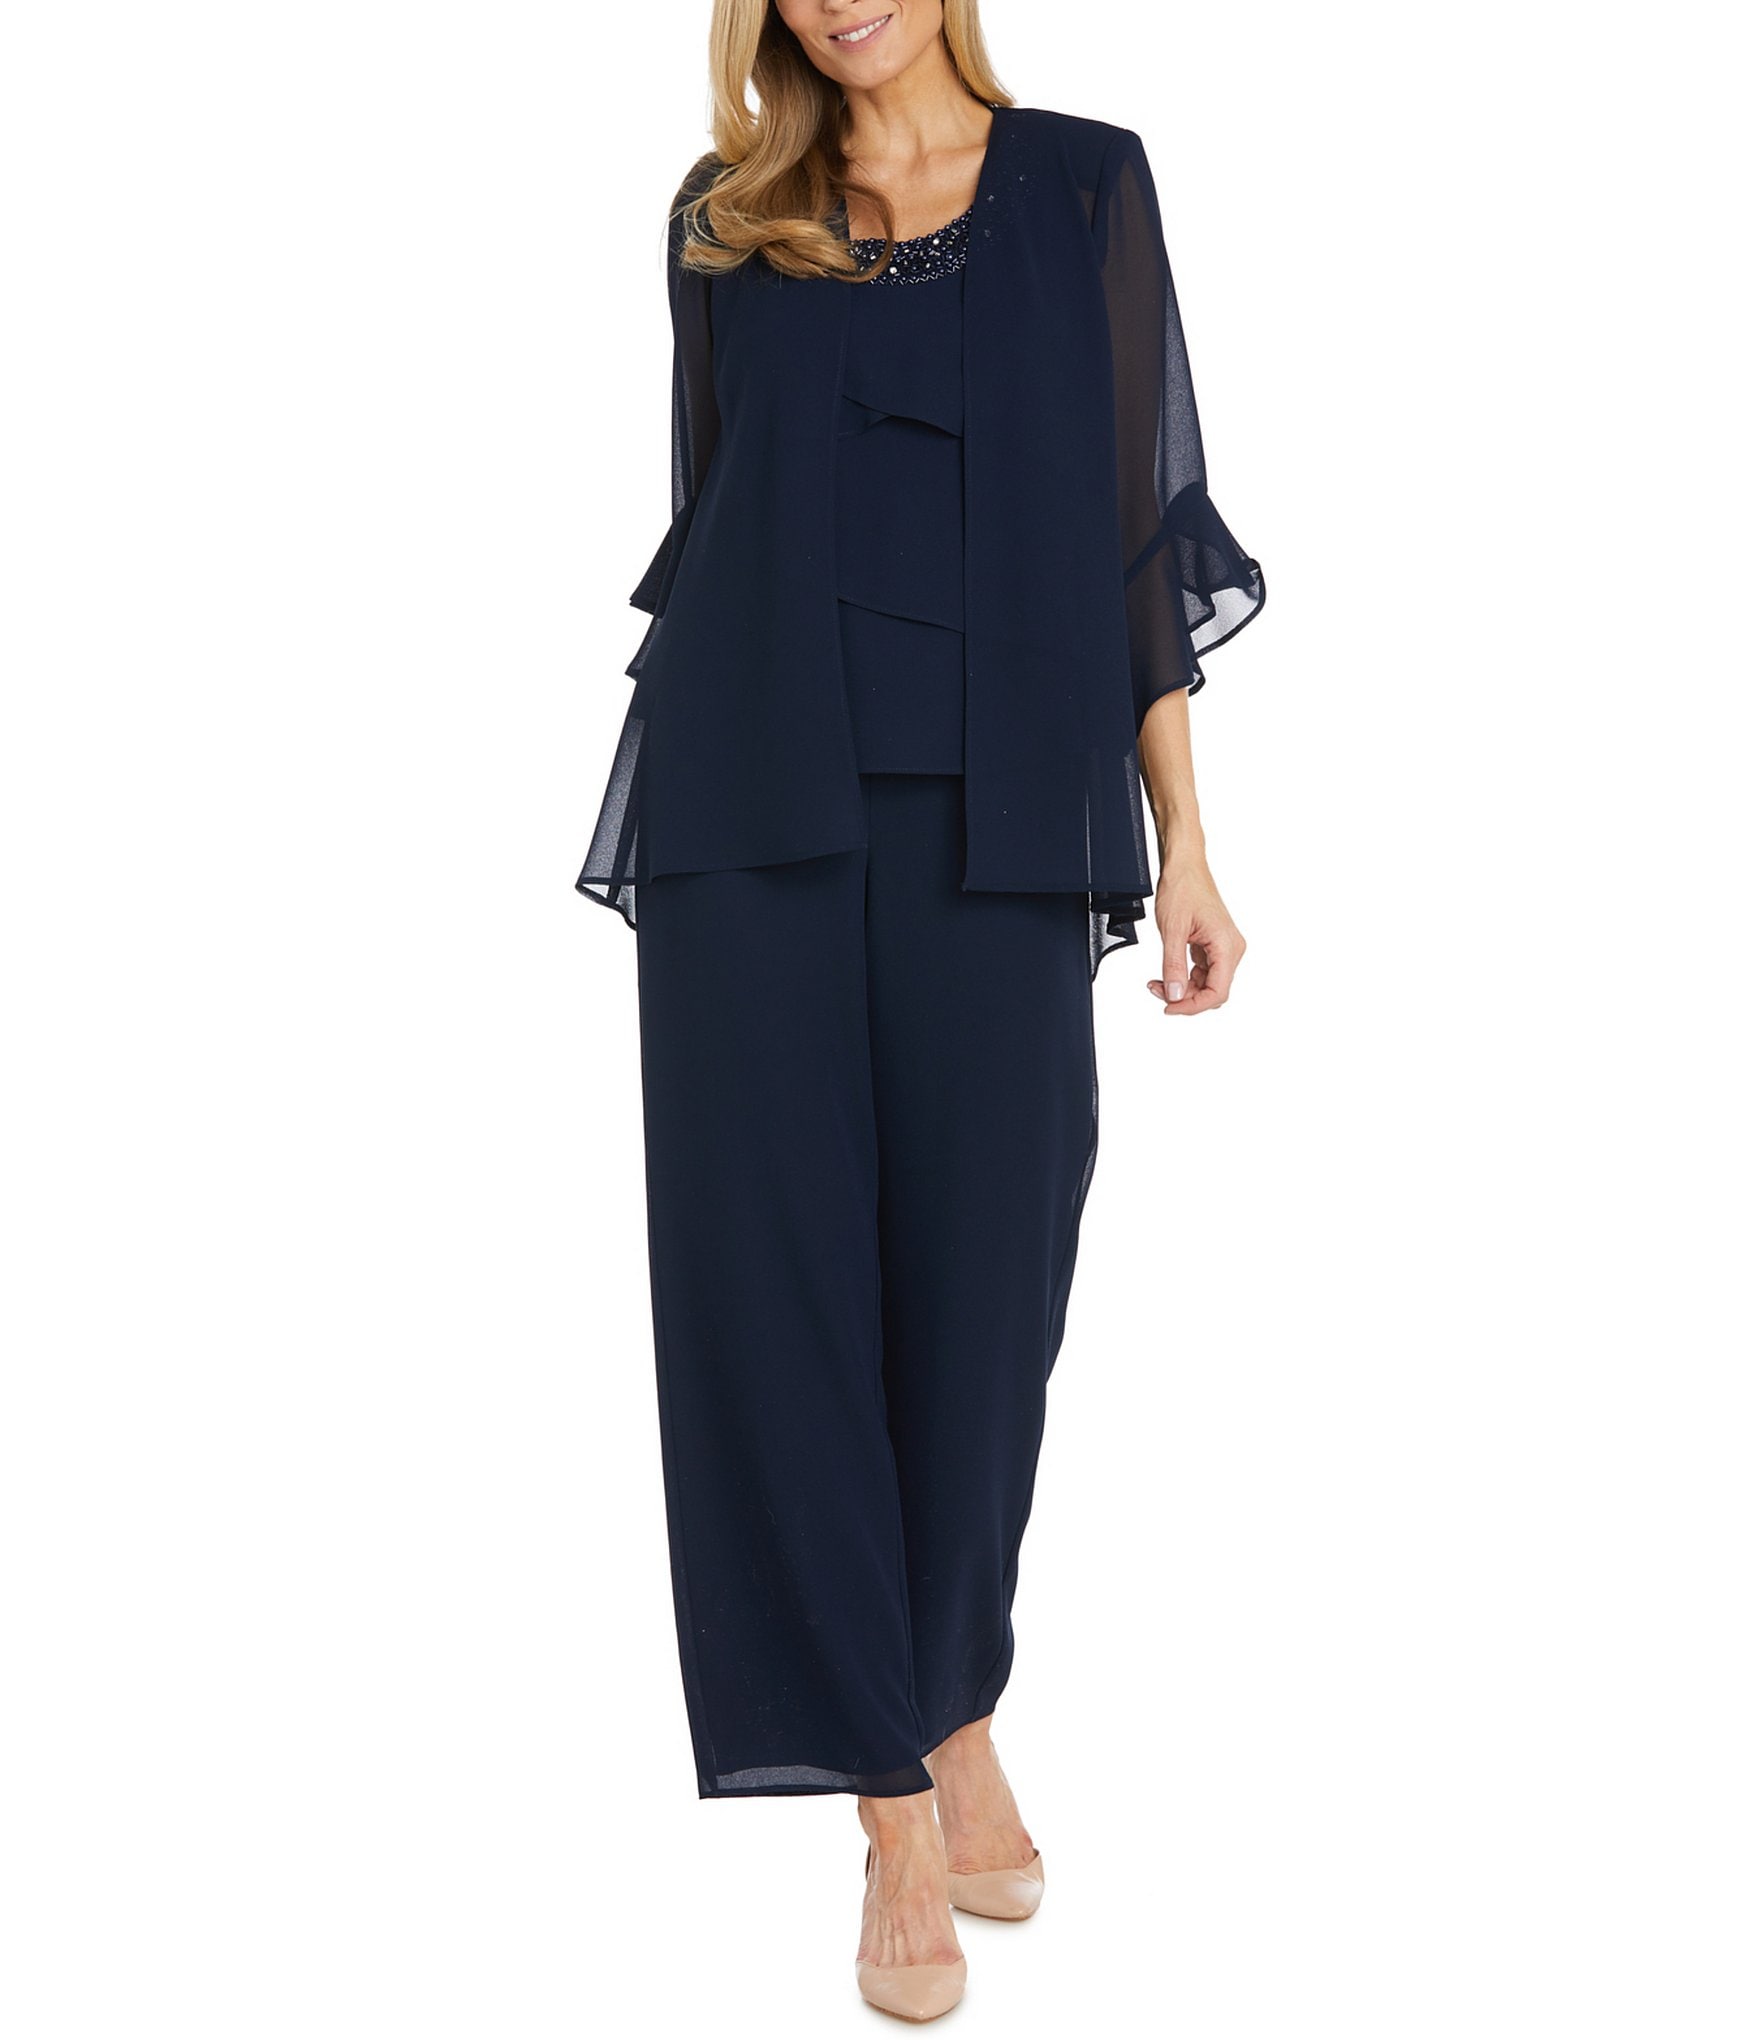 K248019_Classic Jade Chiffon Tunic Top and Pant Set with Boat